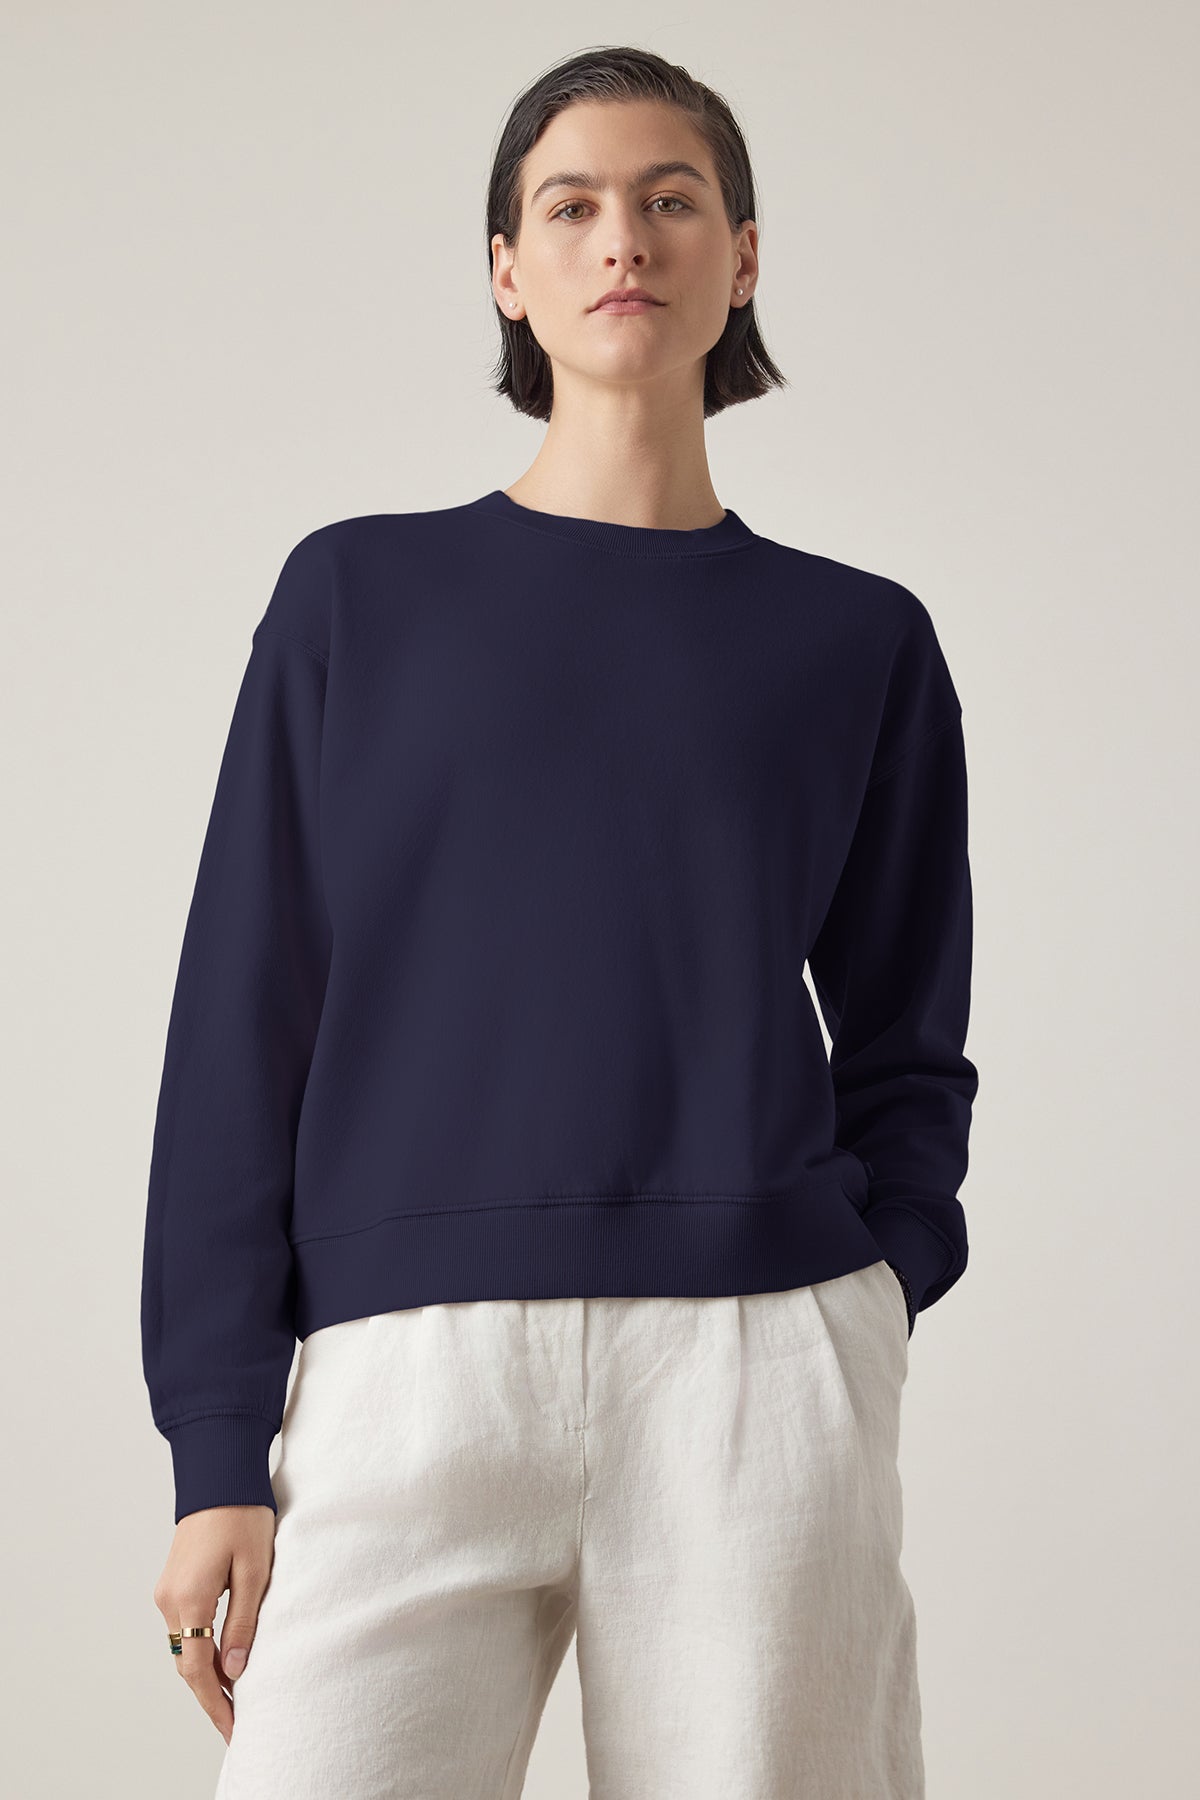 Woman in a Velvet by Jenny Graham Ynez Sweatshirt and white pants standing against a neutral background.-36909403111617